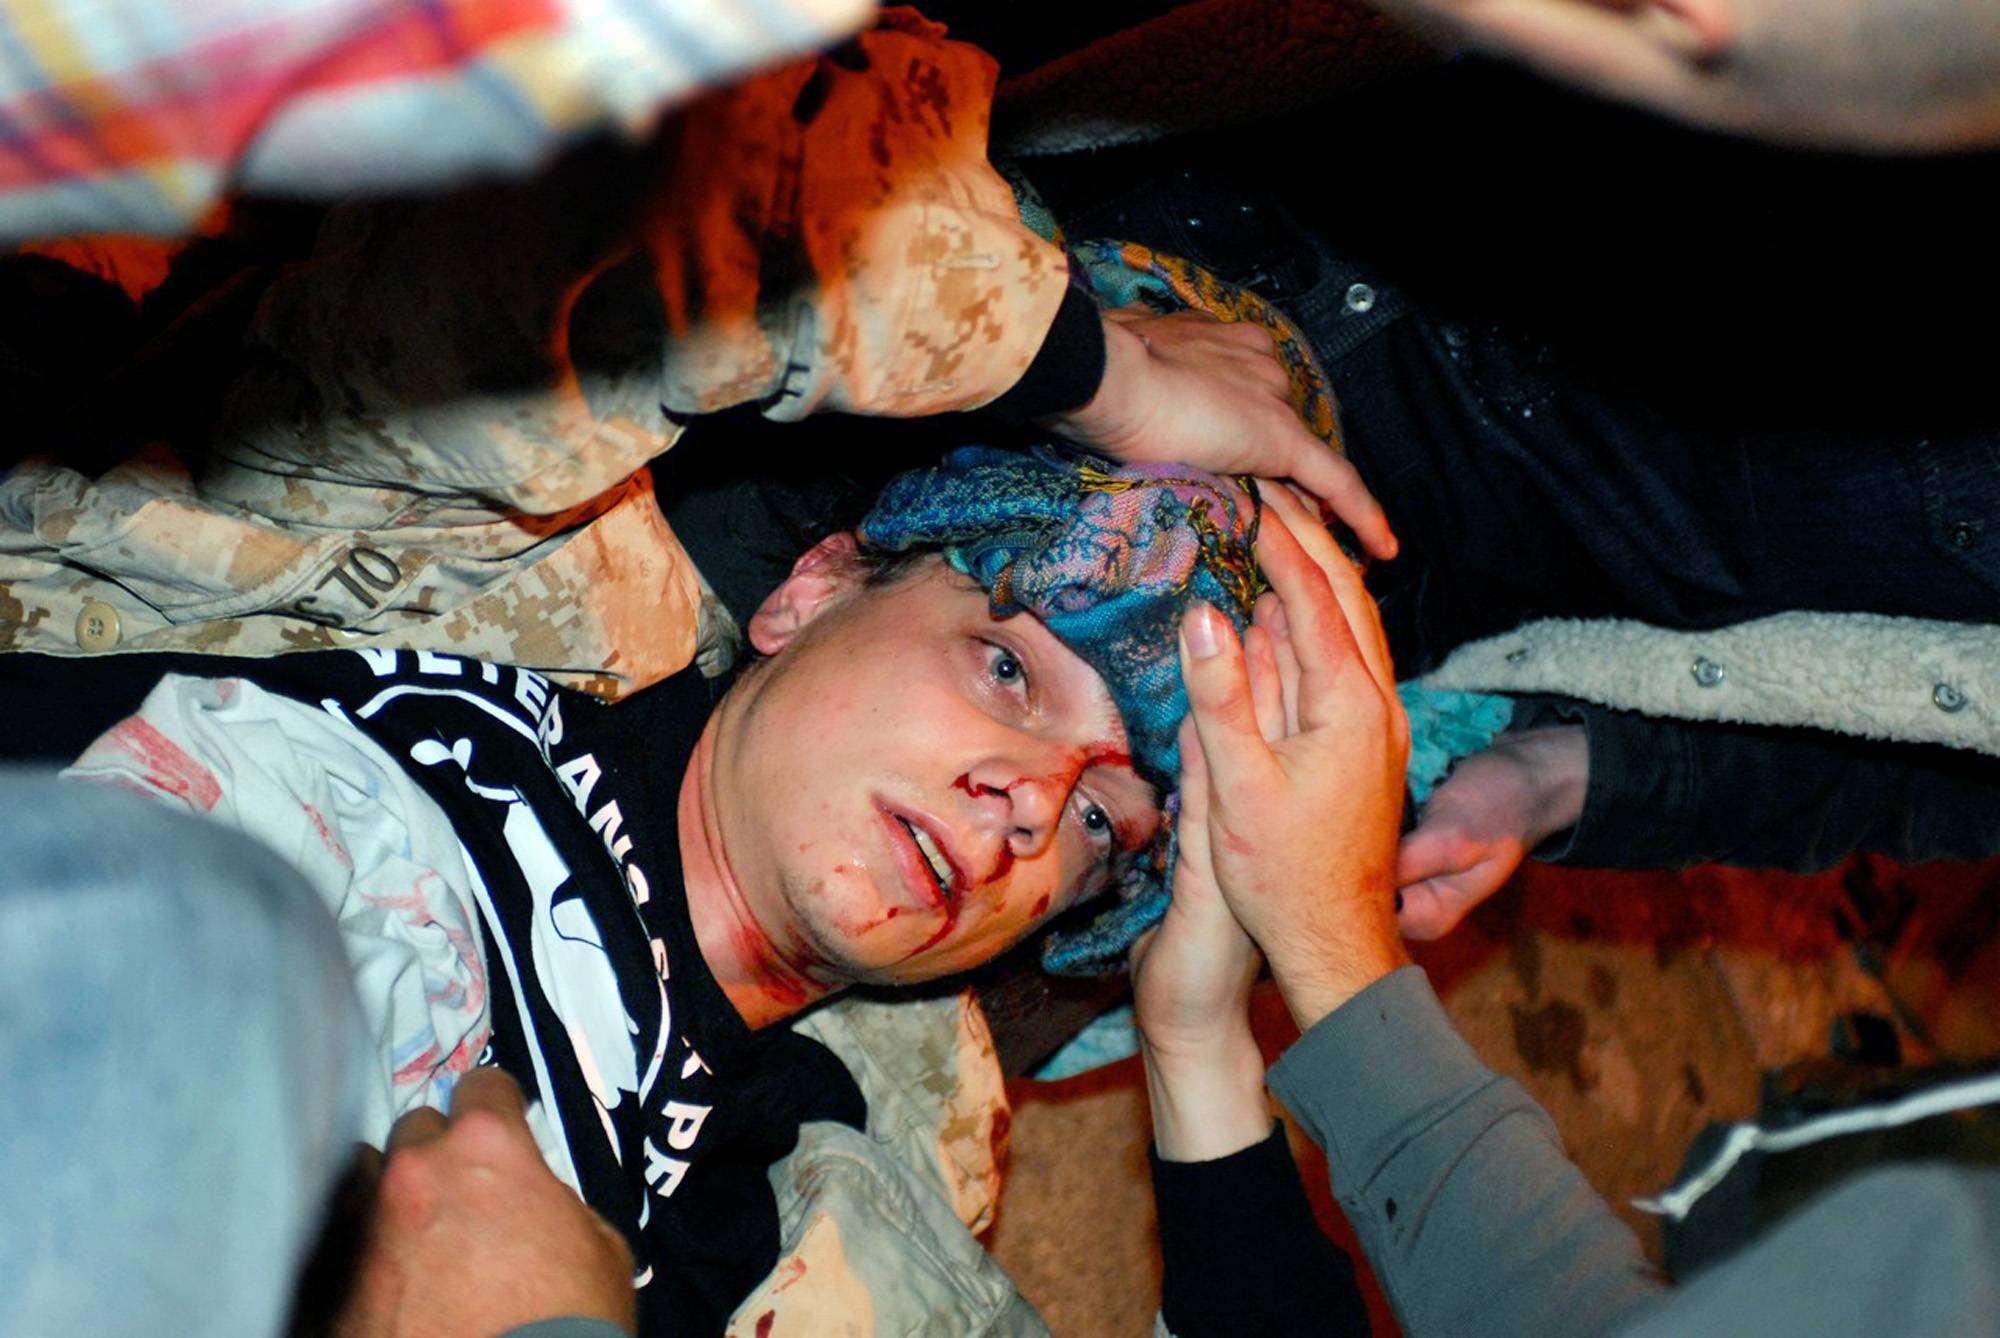 Occupy Oakland Gets Violent - Scott Olsen, 24, an ex-Marine and veteran of the Iraq War, suffered a fractured skull when police flung an object — possibly a tear gas canister — at a group of Occupy Oakland protesters on Tuesday. Other demonstrators rushed to his aid but, to their surprise, as they helped Olsen, an officer tossed another canister toward the group, a video shows.(Photo: AP Photo/Jay Finneburgh)